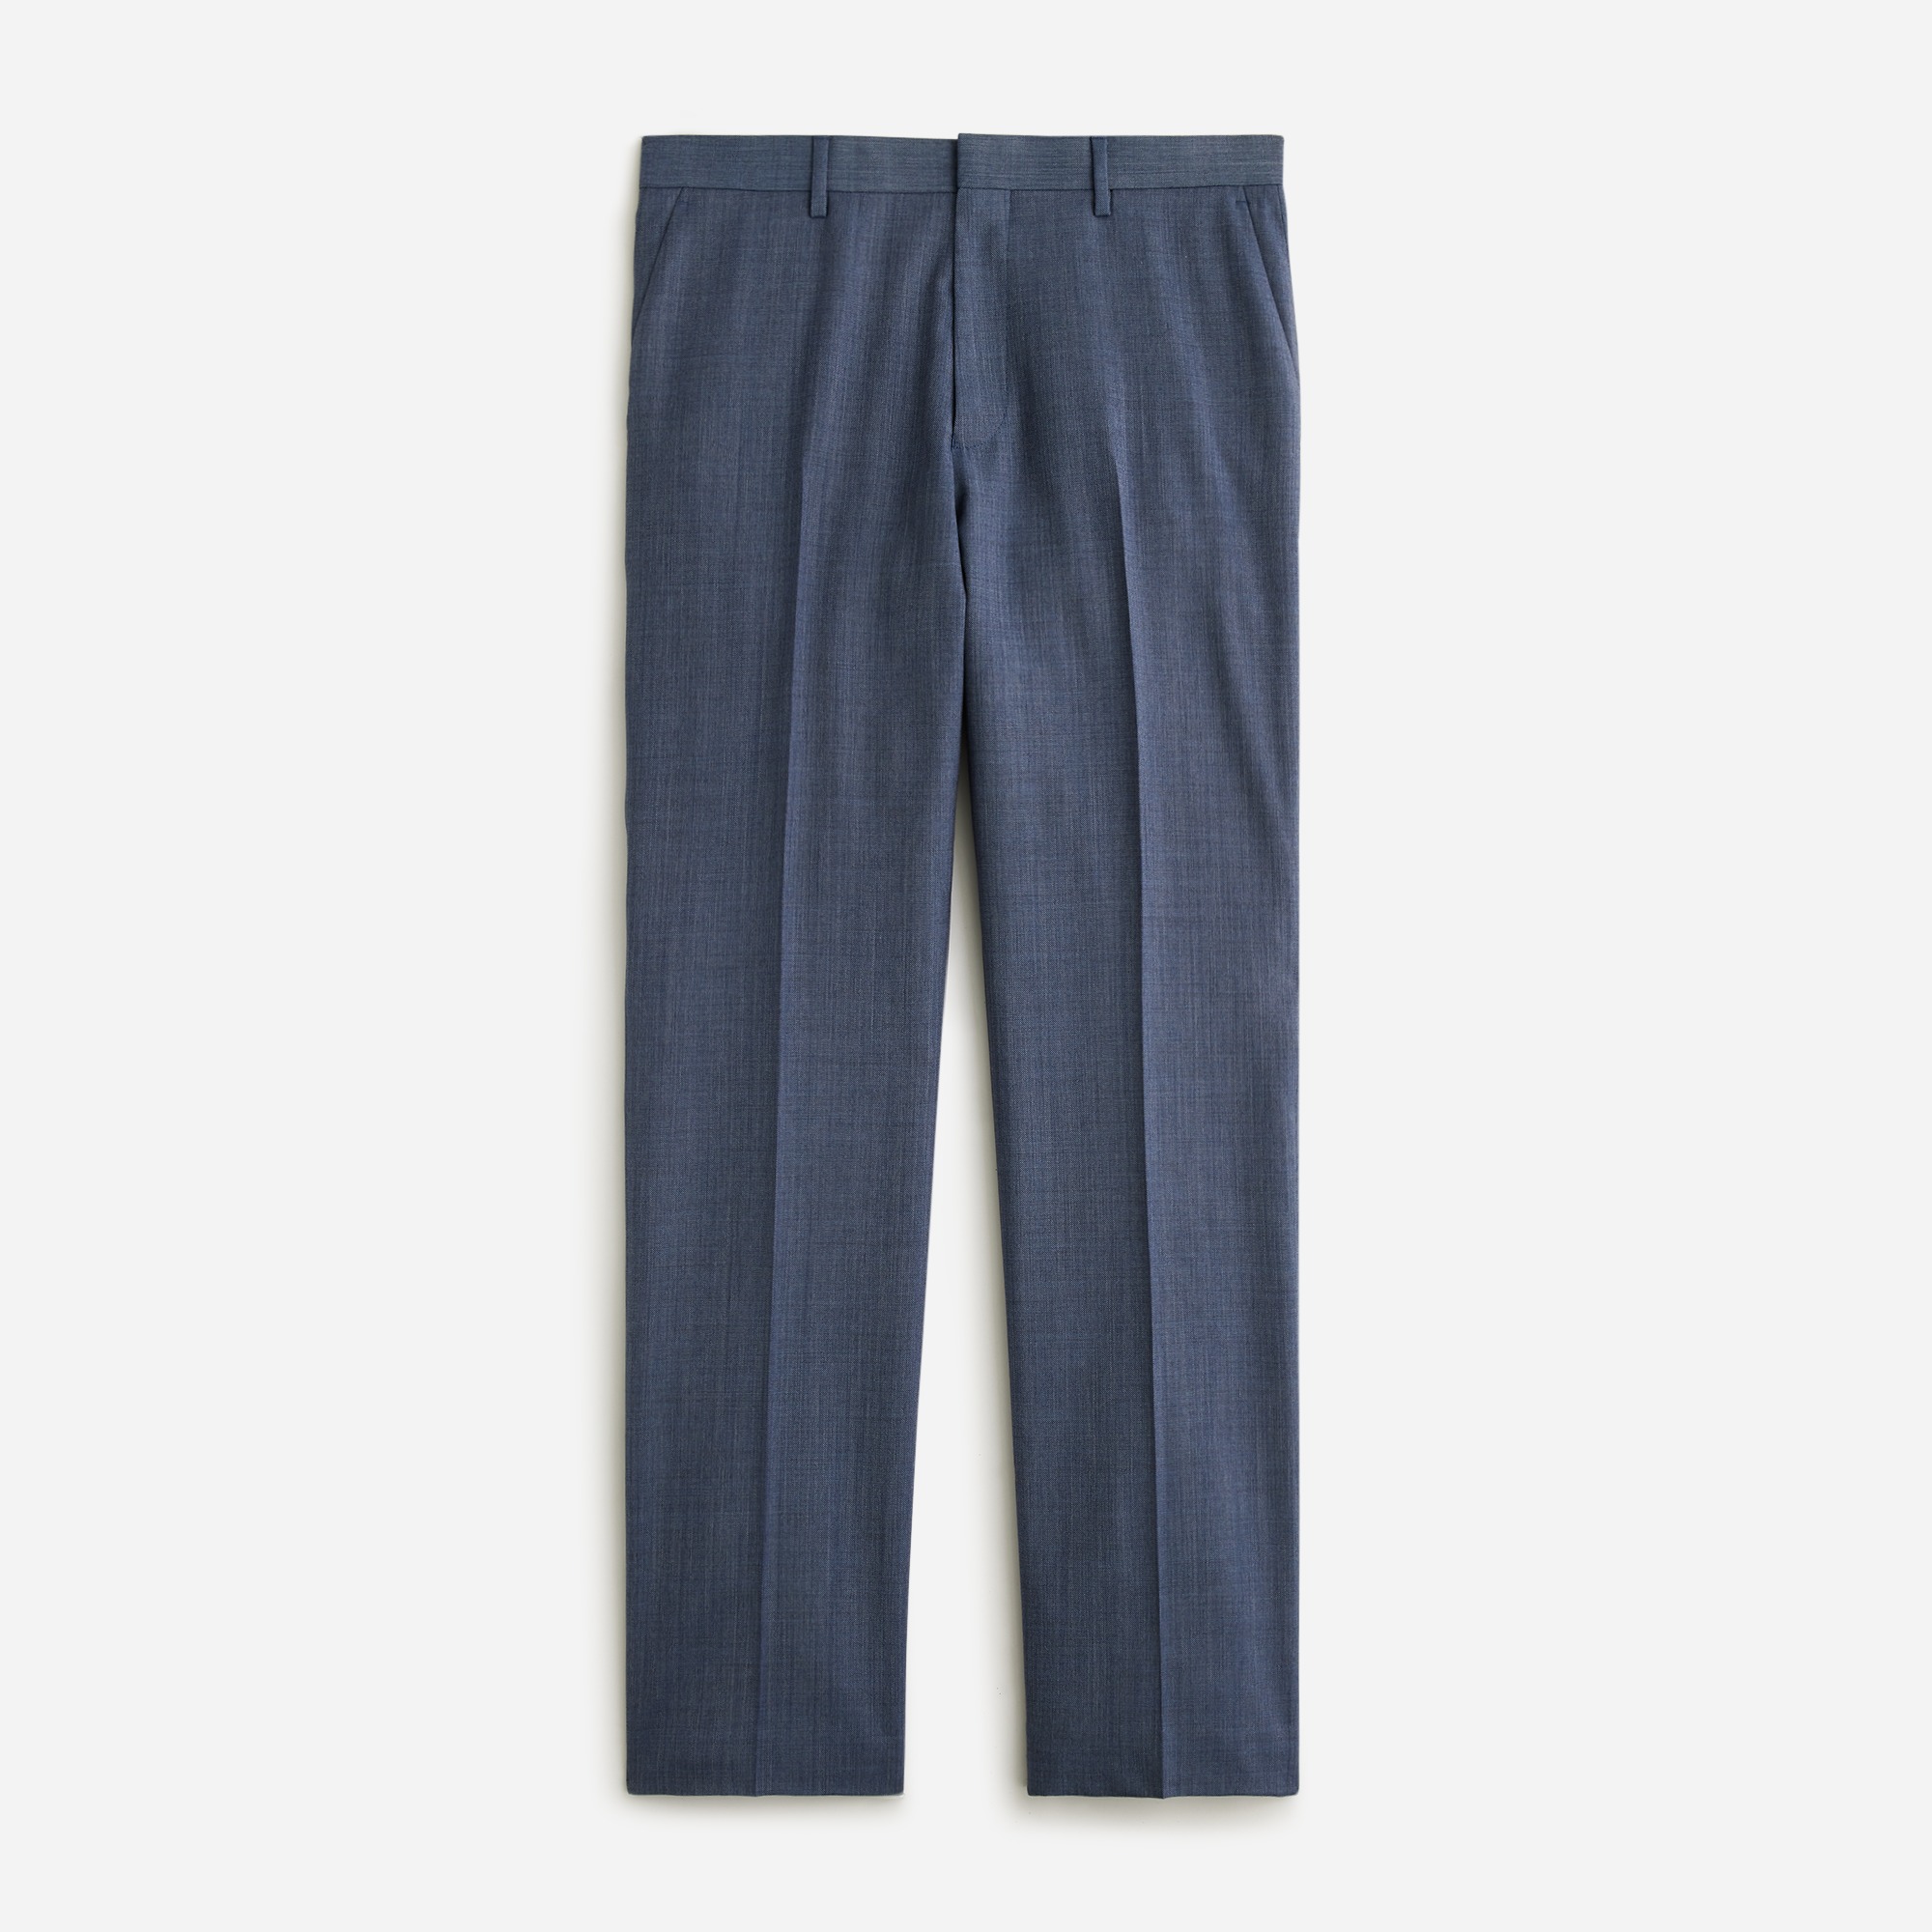 Jcrew Crosby Classic-fit suit pant in Italian stretch worsted wool